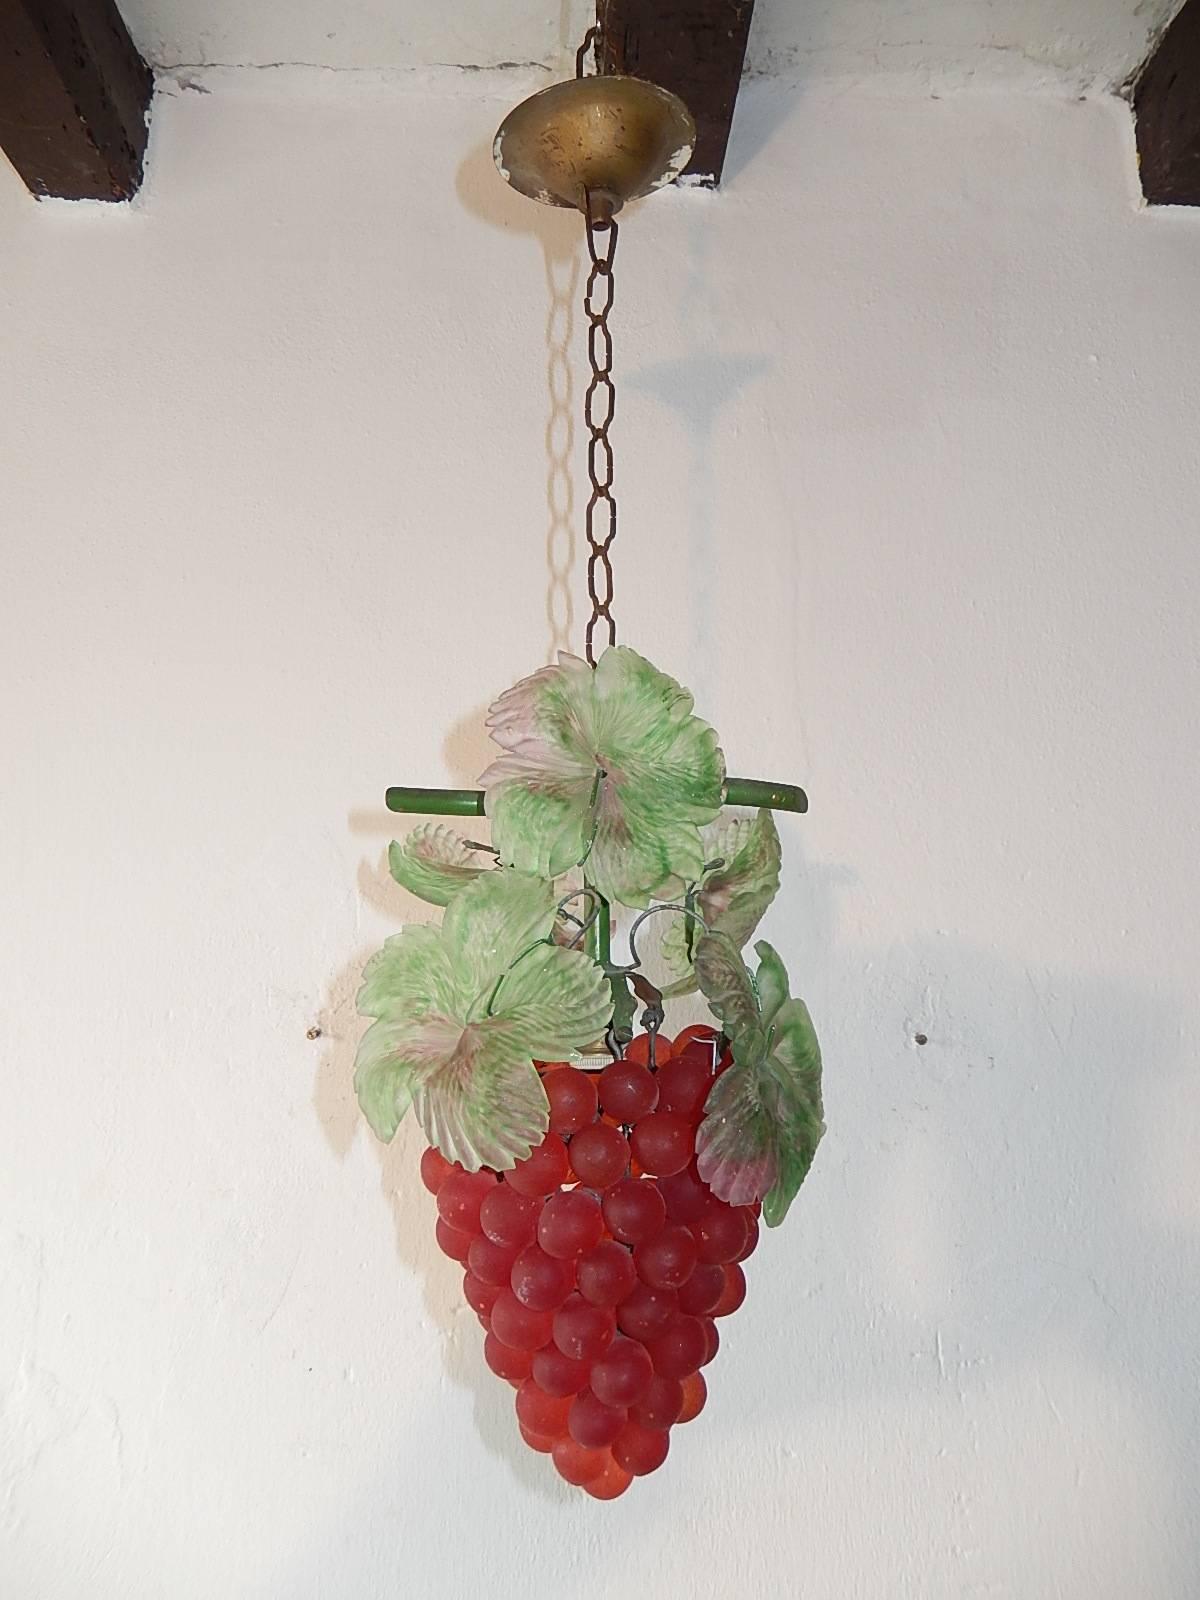 Housing one-light. Rewired and ready to hang. Red Murano glass grapes and big glass leaves. Adding another 9 inches of original chain and canopy. Free priority shipping from Italy.